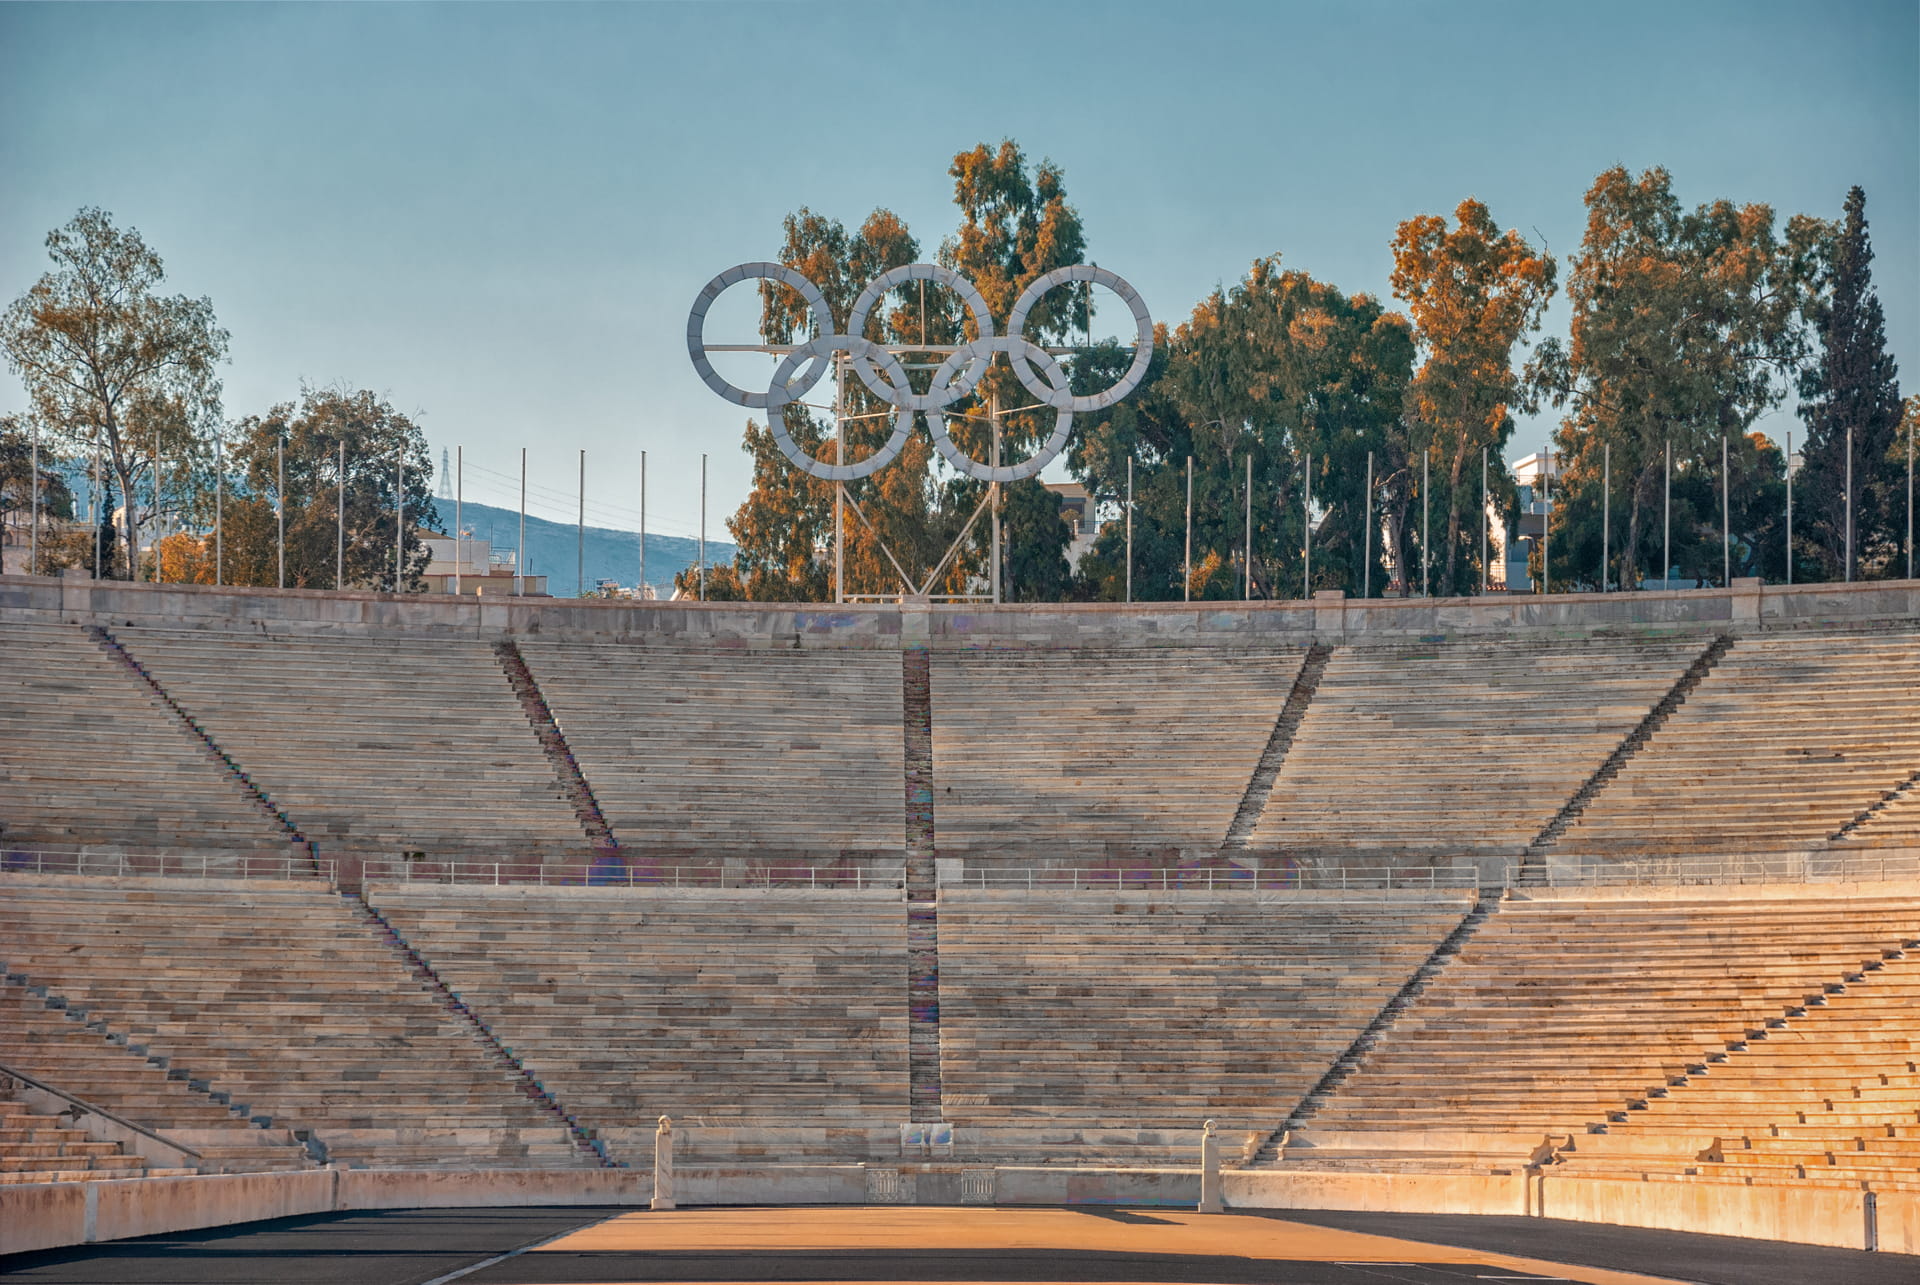 The Panathenaic is the first greek stadium in Athens